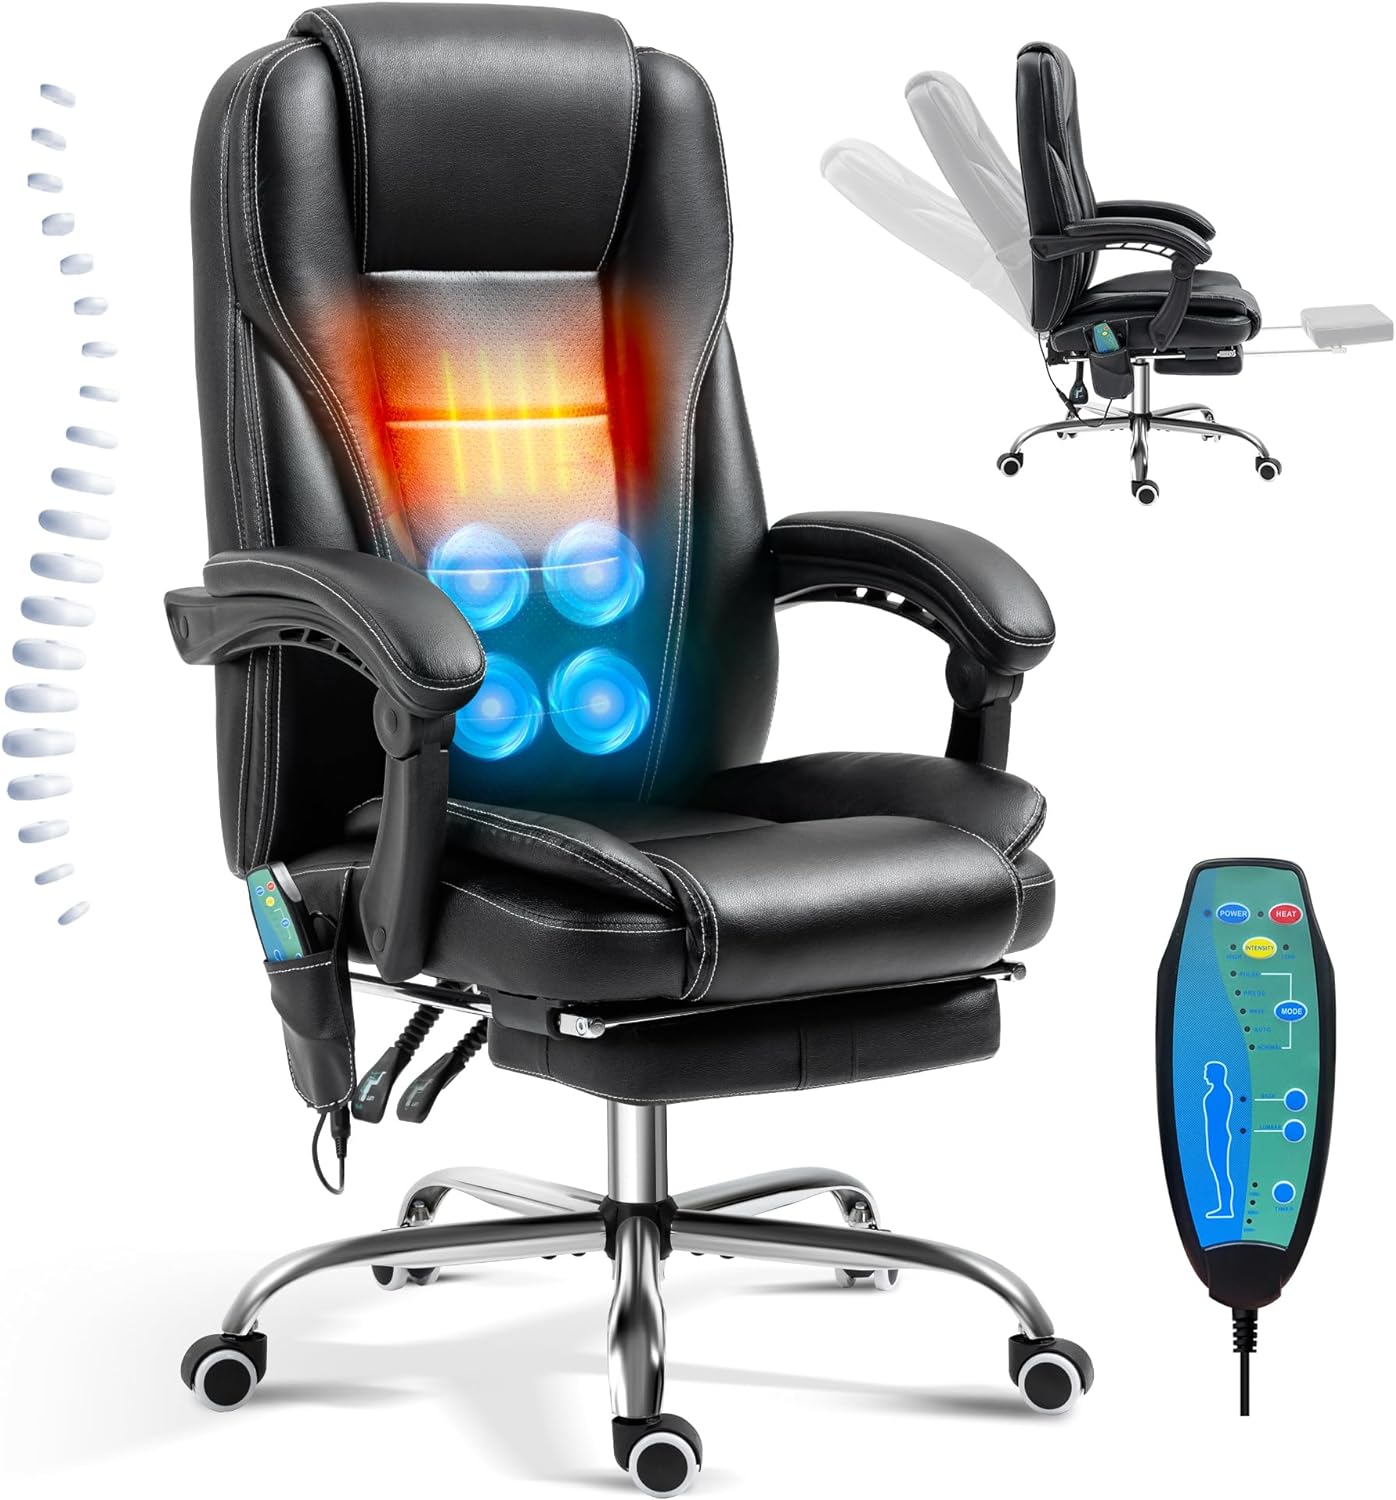 TonghuaS Reclining Massage Office Chair with Footrest, High Back Ergonomic Office Chair with Heating Function for Home Executive Study